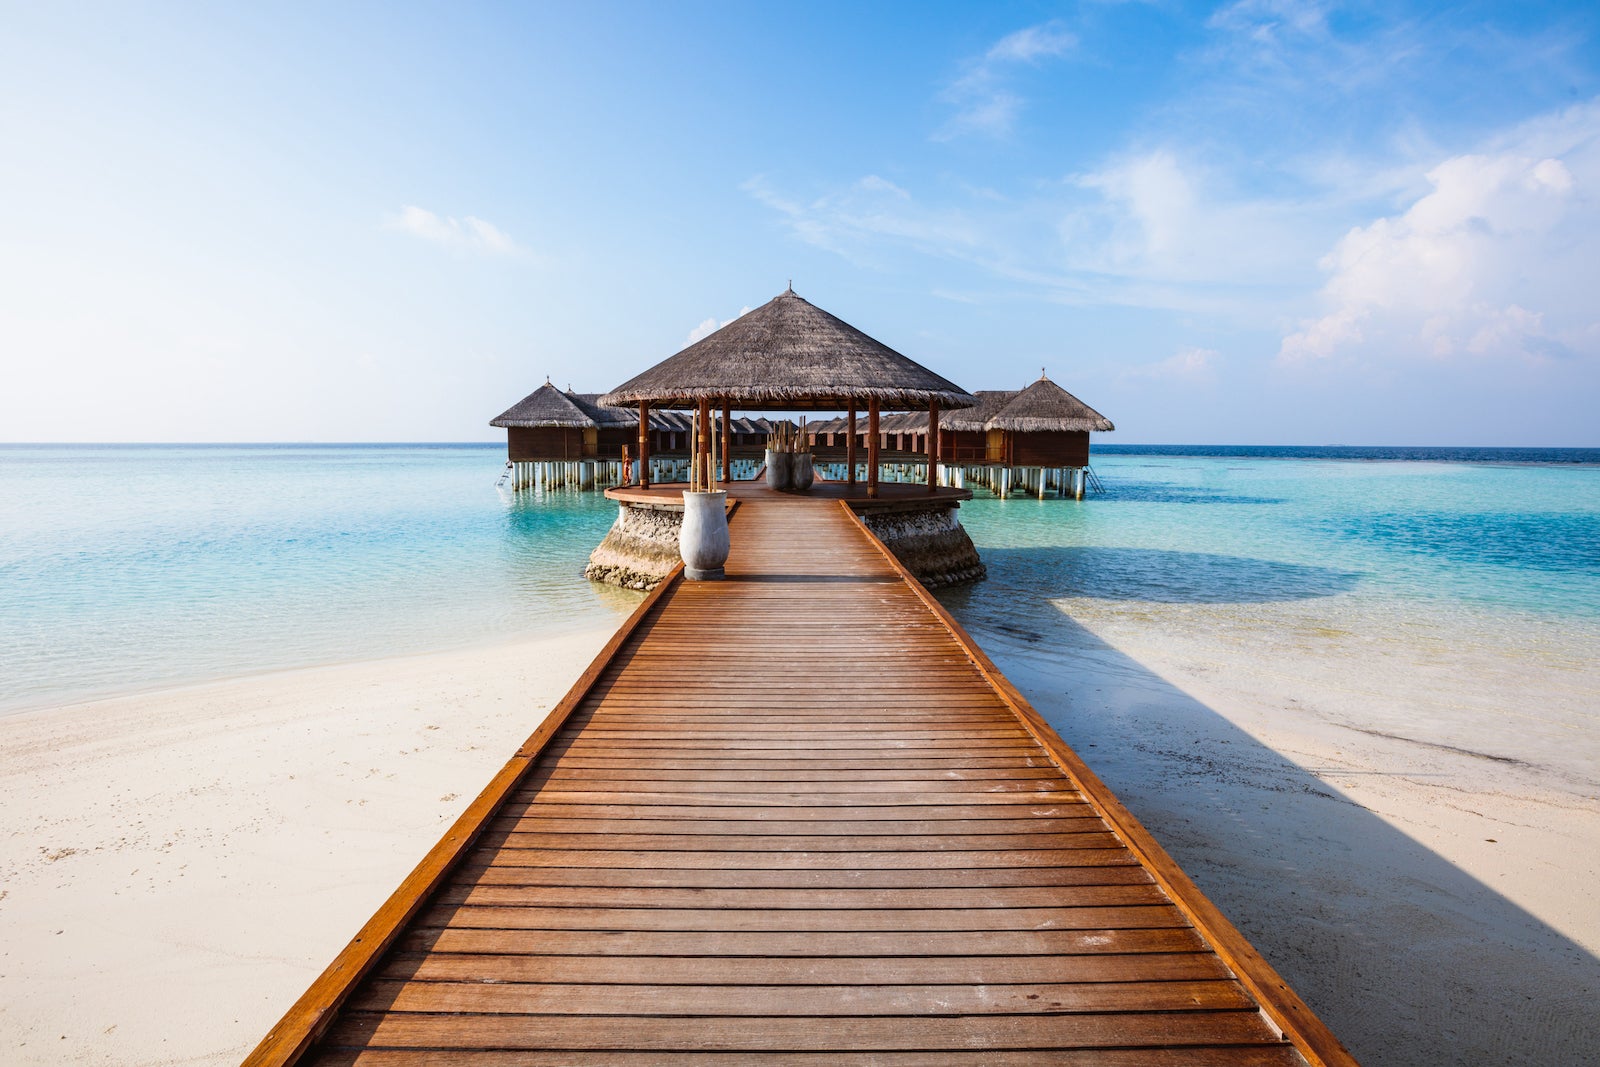 Wooden jetty on a tropical island, Maldives